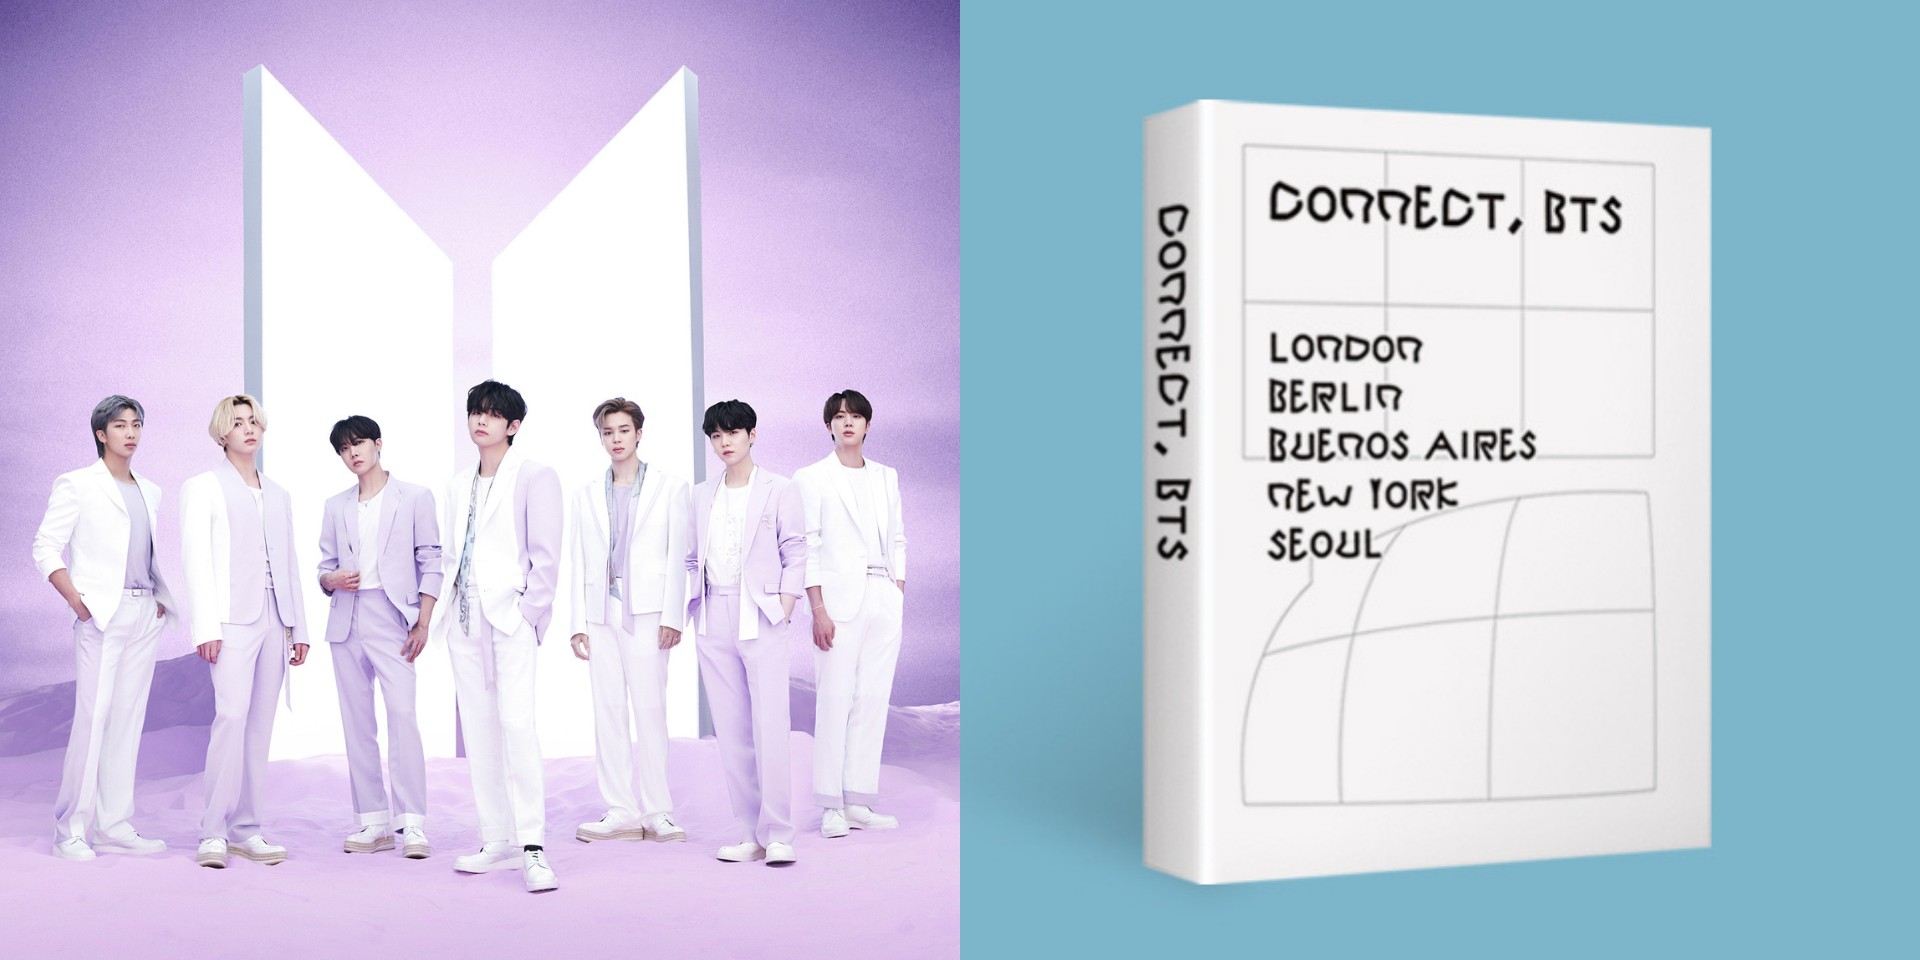 BTS release free e-book and font for global 'CONNECT, BTS' art project: "Diversity can create a world where differences can CONNECT us together."